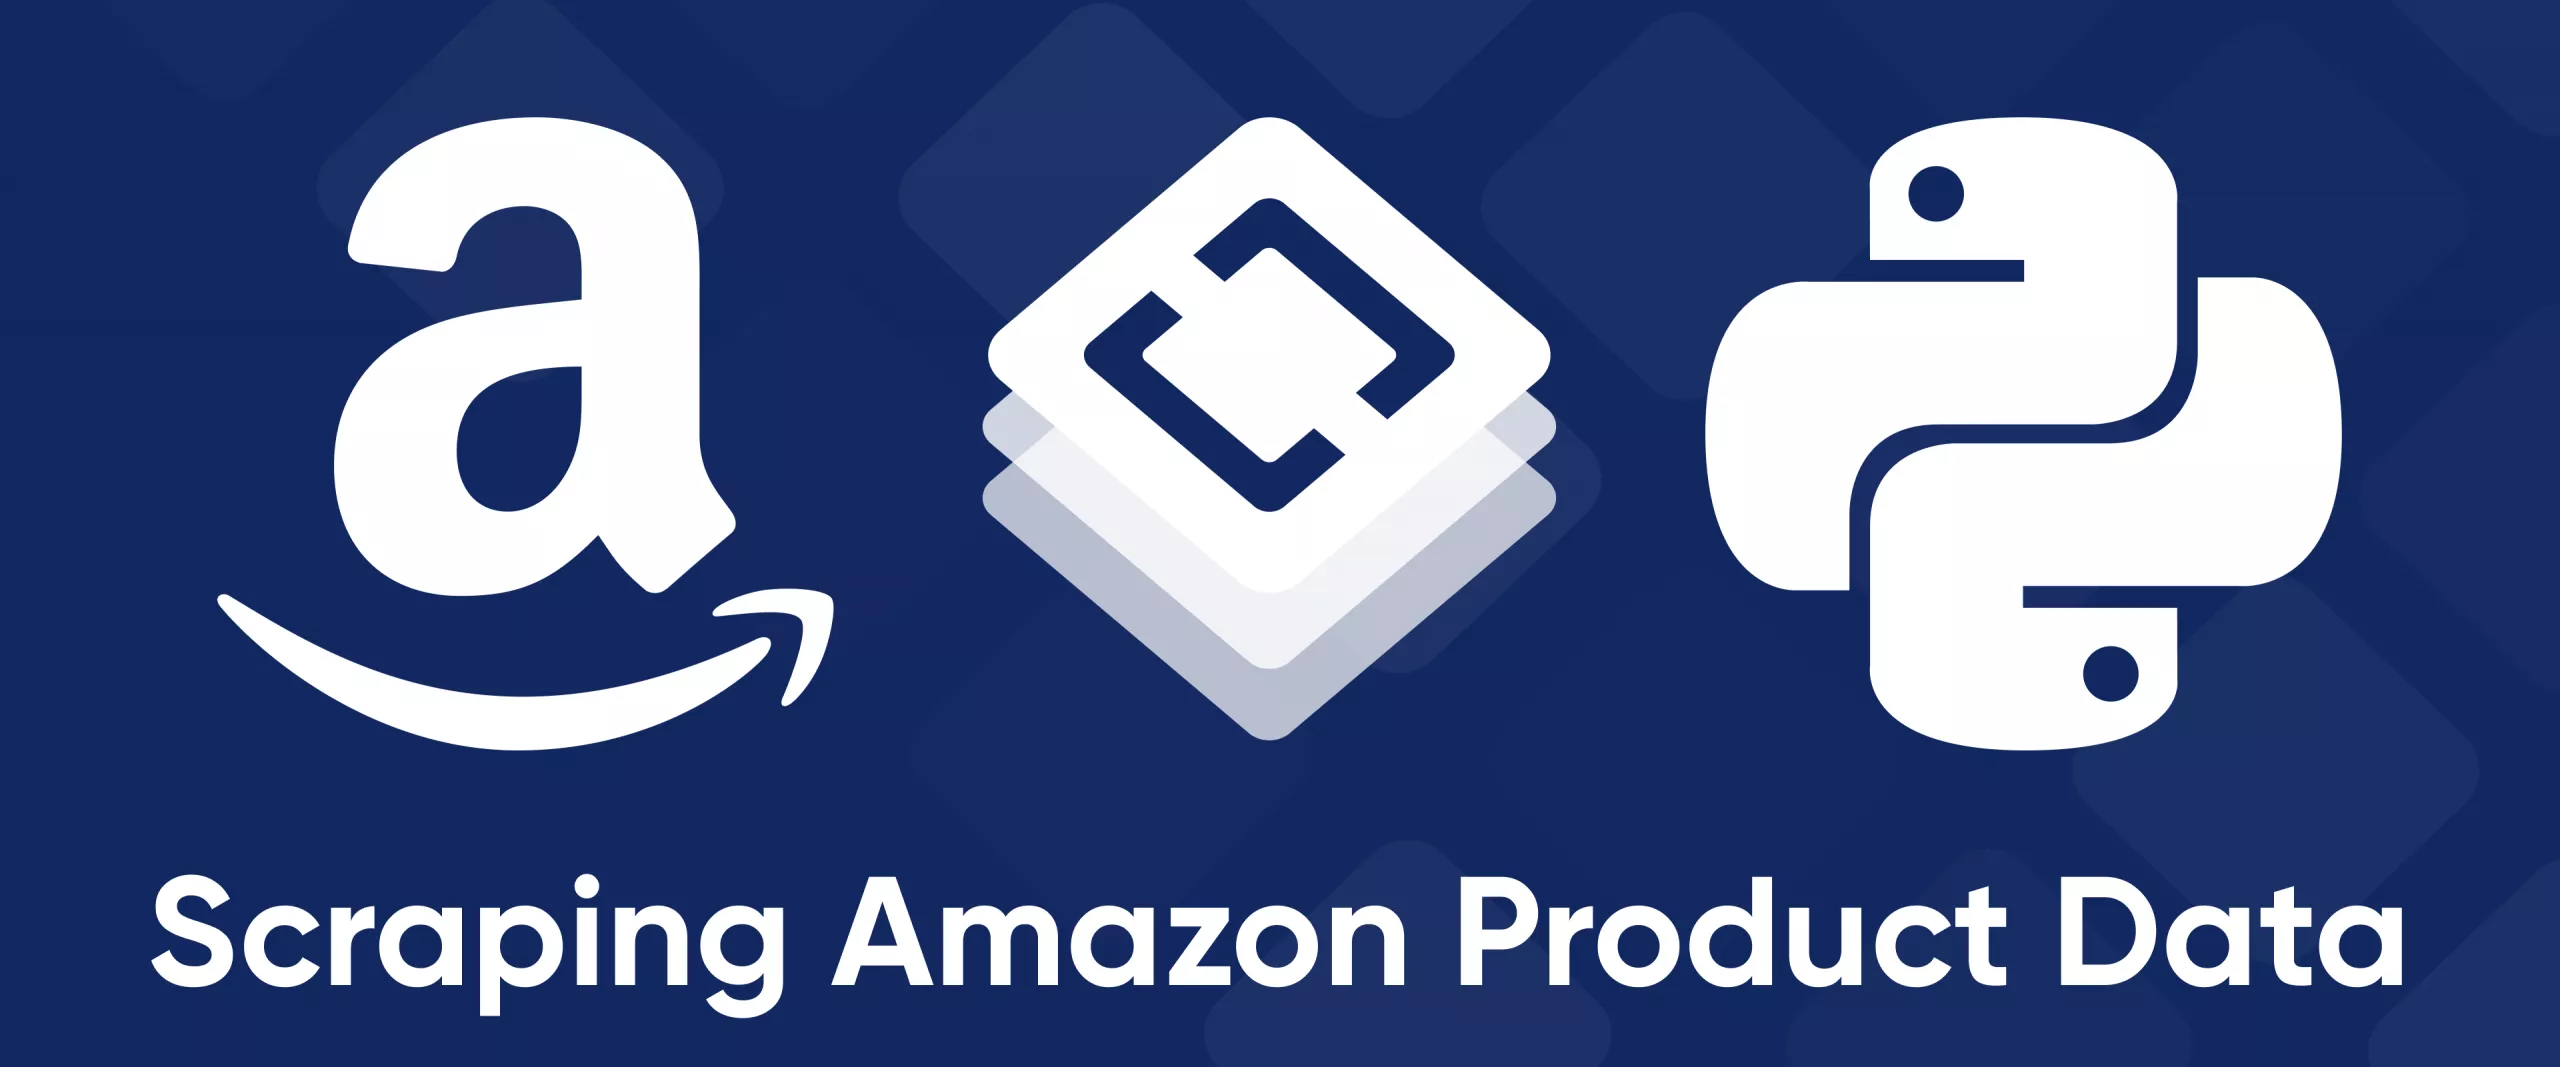 The Complete Guide to Scraping Amazon Product Data using Python